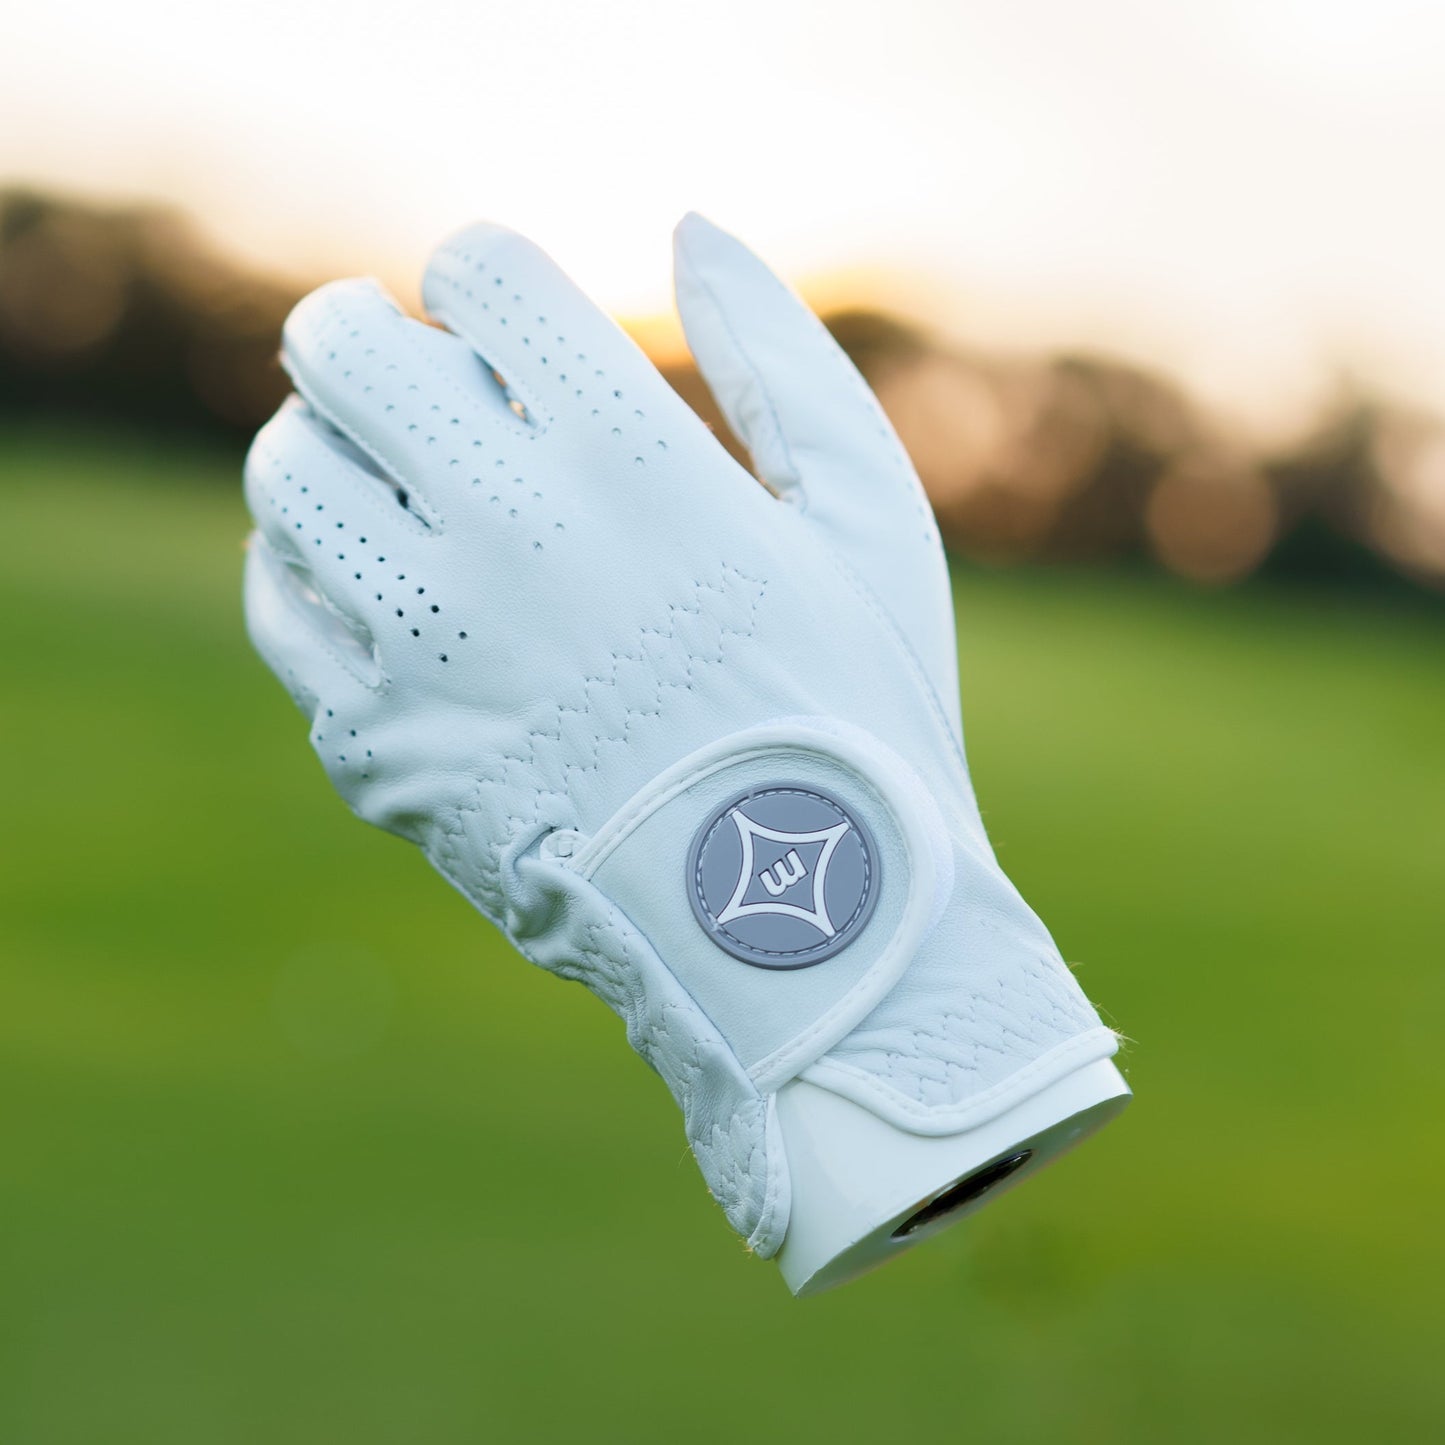 The InTouch Performance Golf Glove